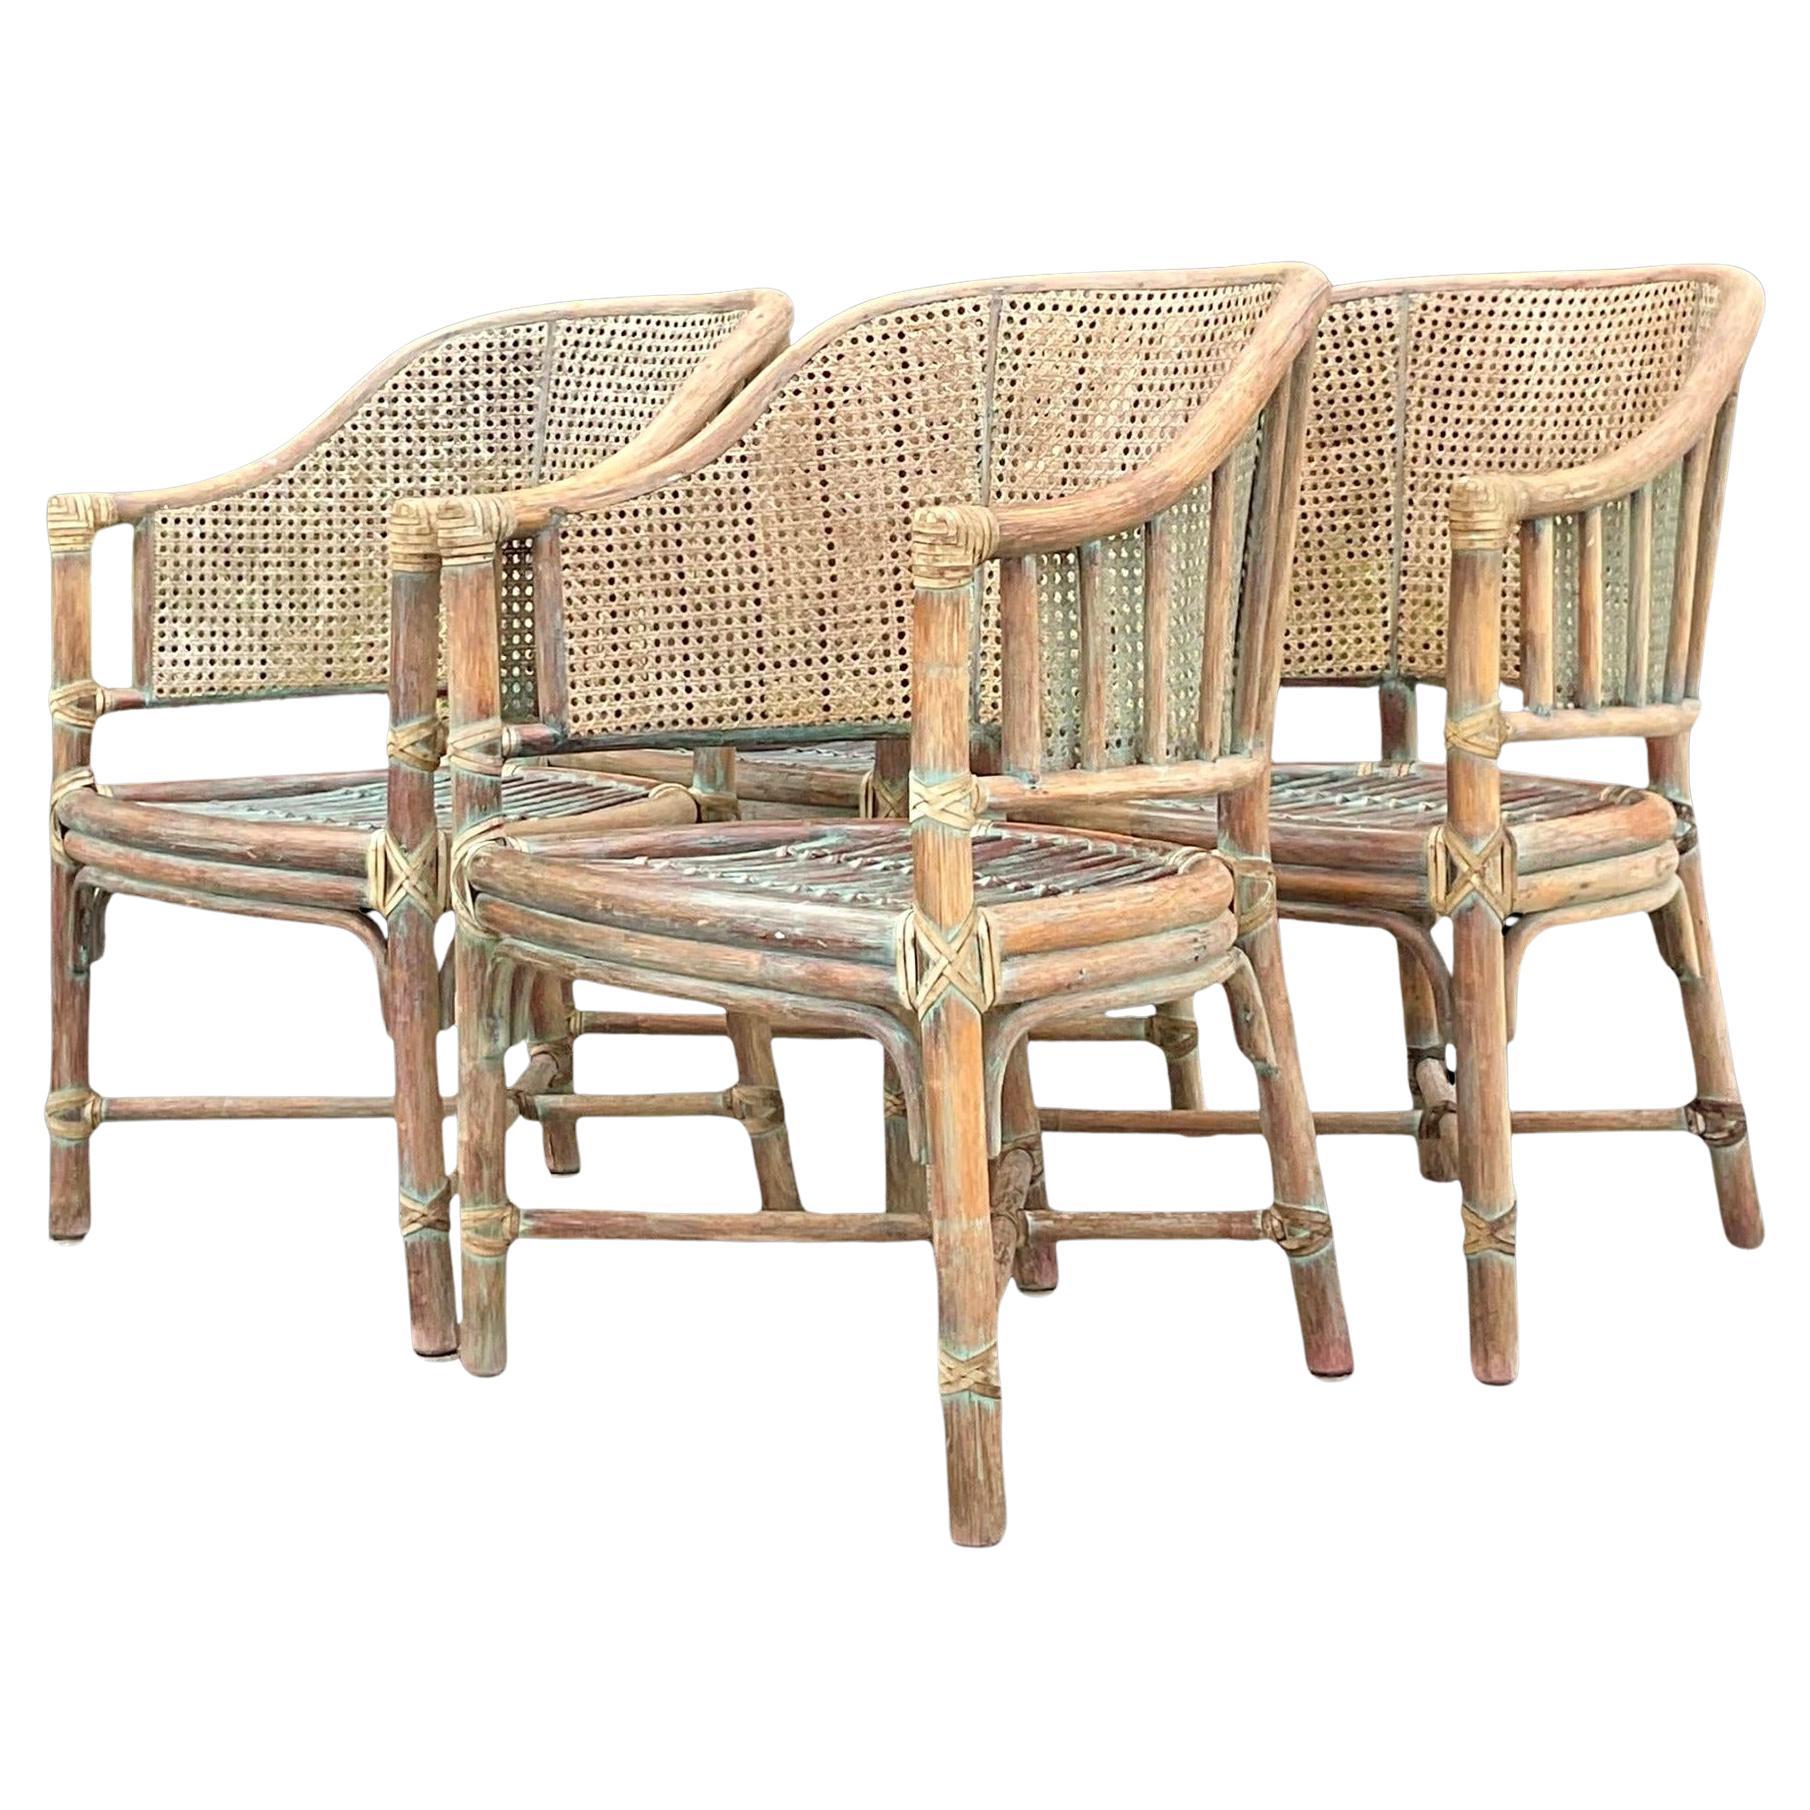 Vintage Coastal McGuire Patinated Bent Rattan Cane Dining Chairs - Set of 4 For Sale